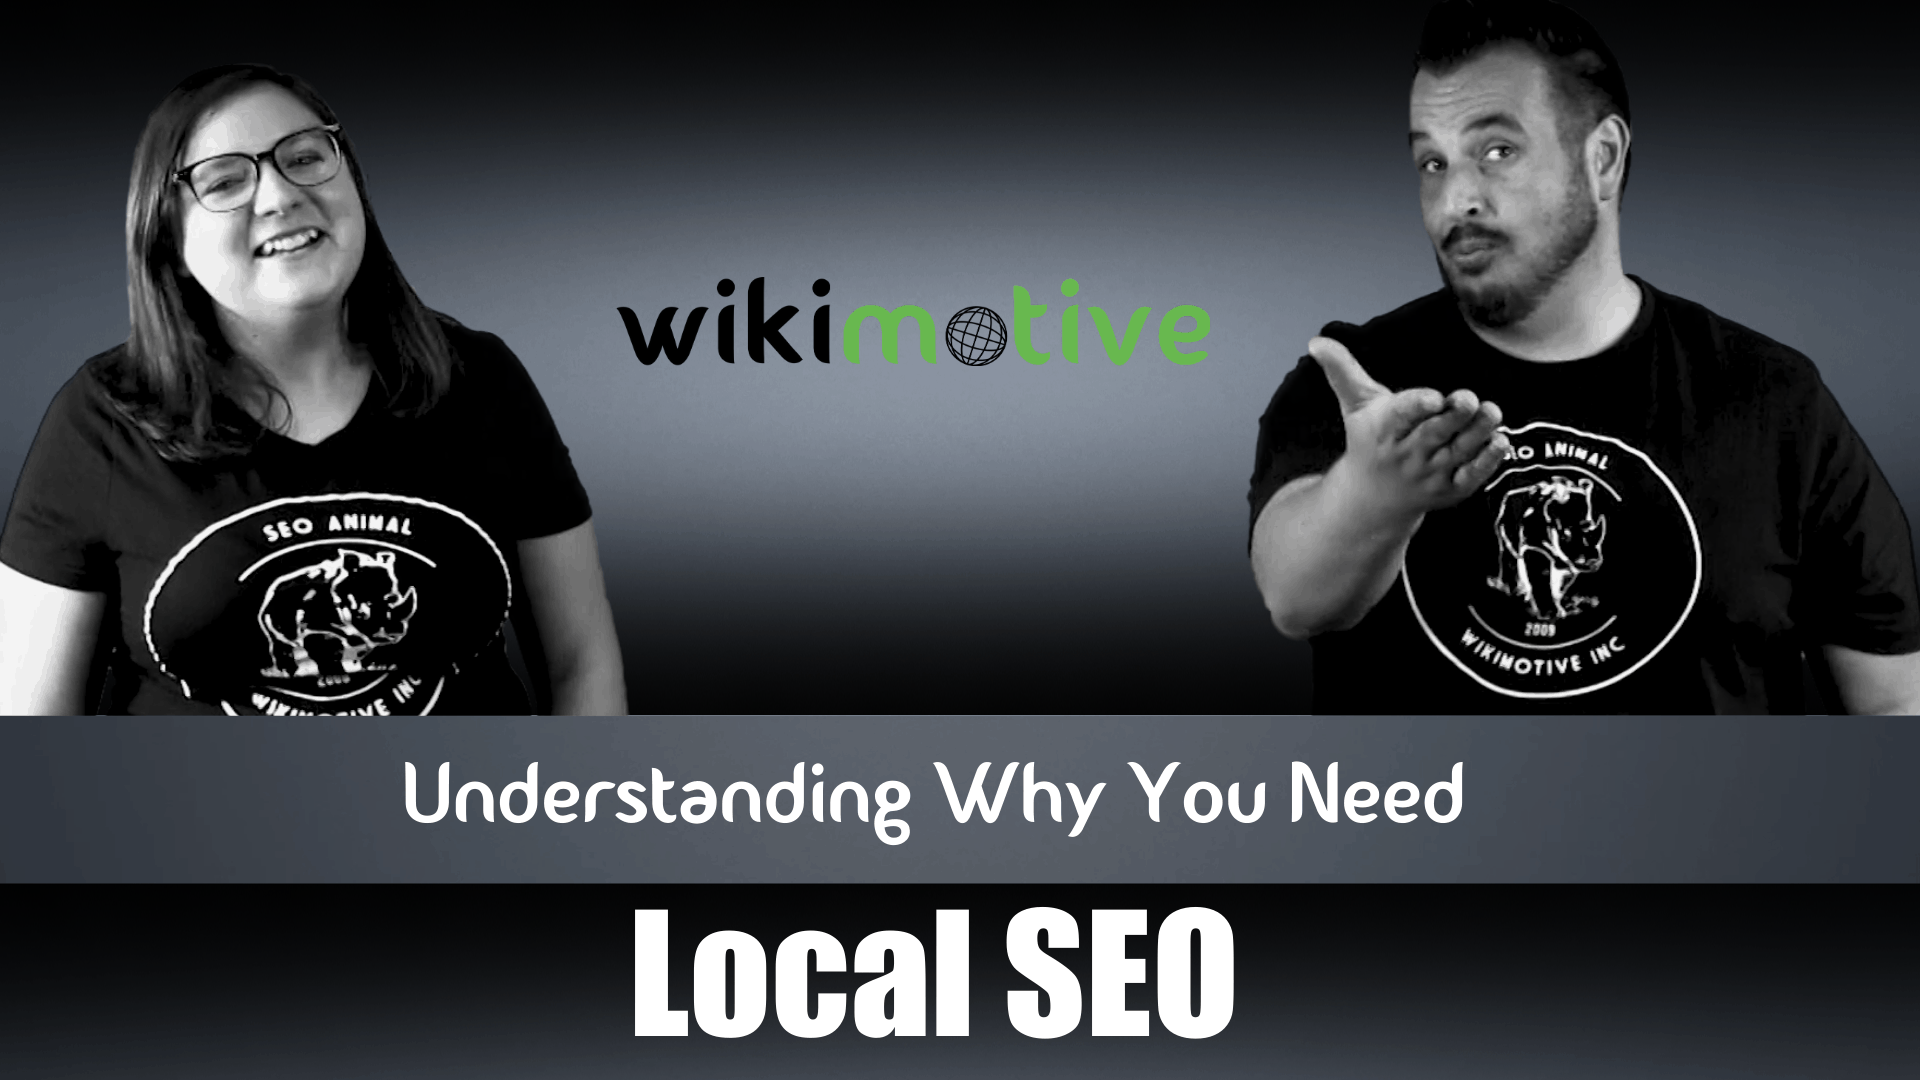 Just the Tip – Local SEO